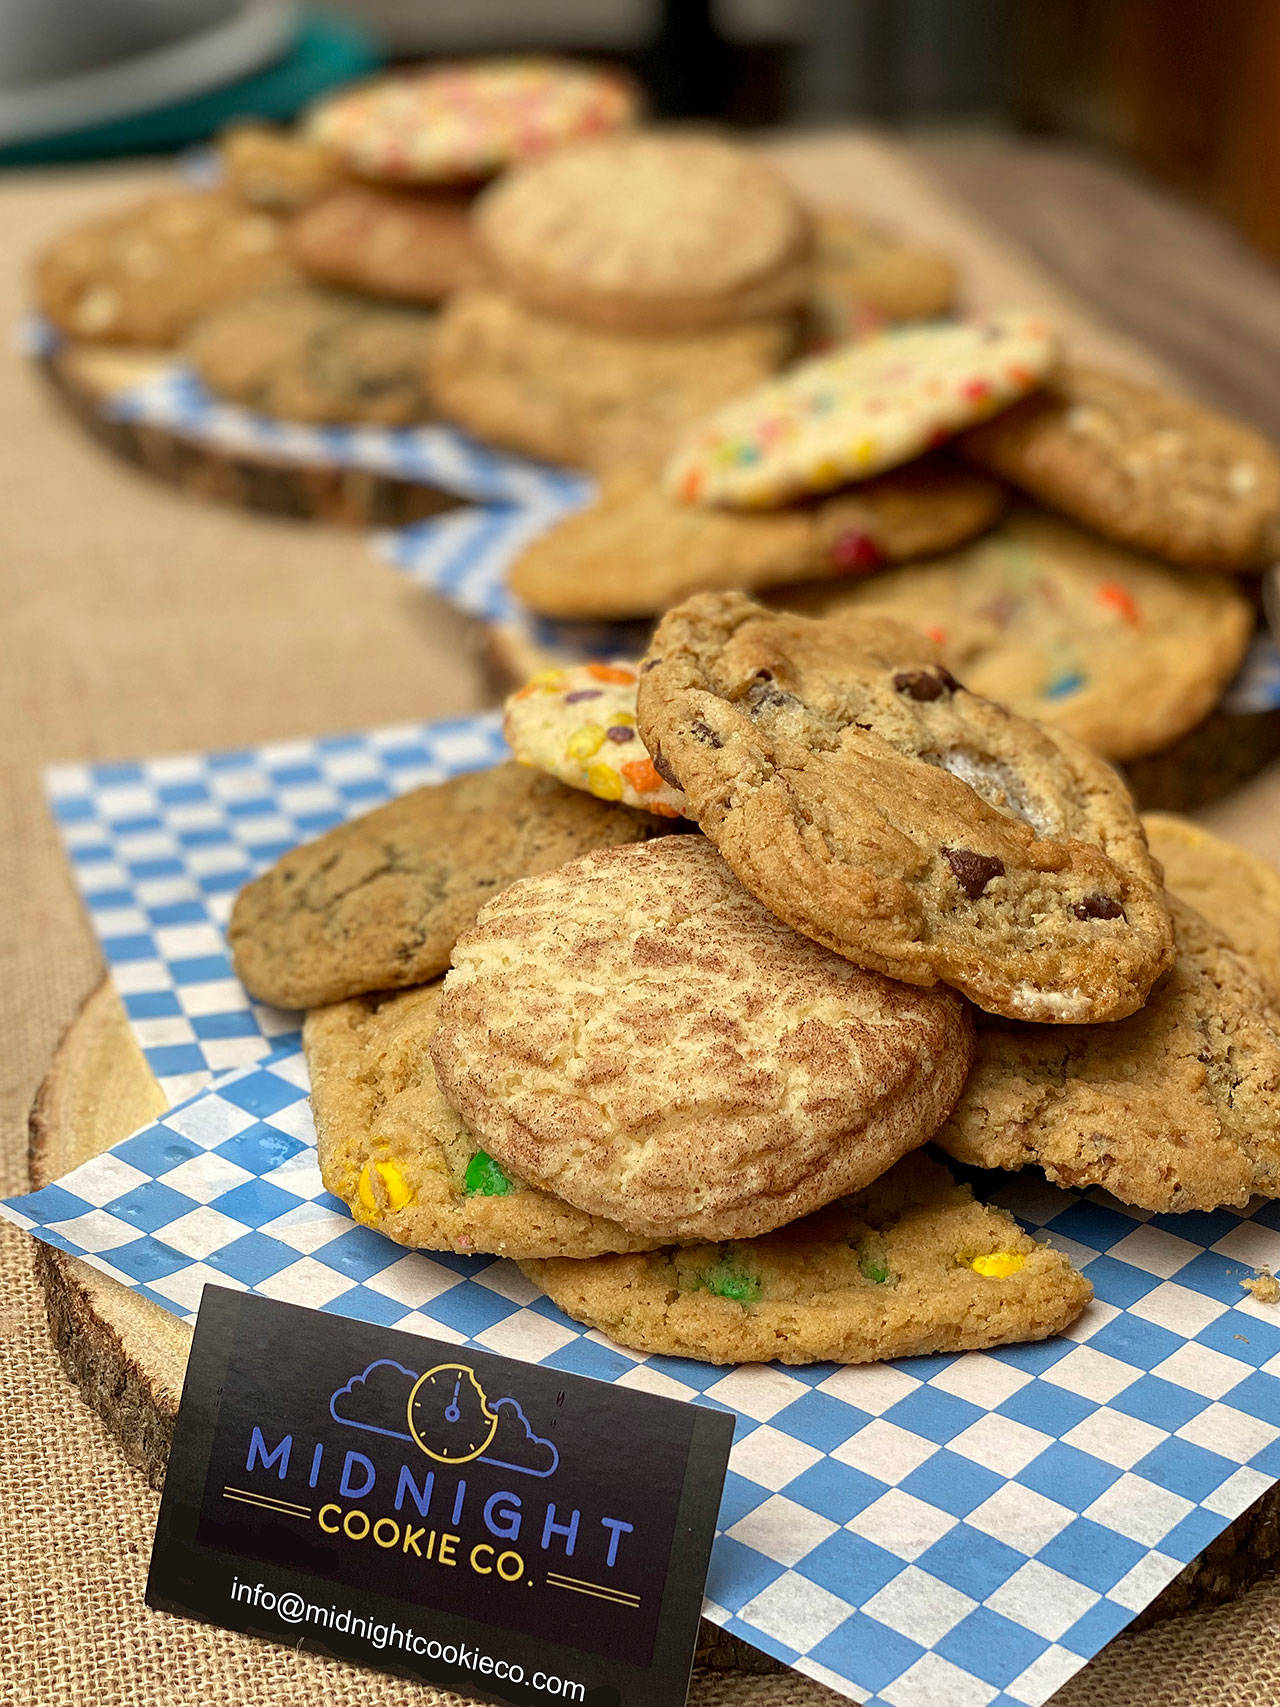 Midnight Cookie Co. specializes in late-night craving satisfaction, courtesy of smartphone apps. It opened locations in Edmonds/Shoreline and Everett in 2018. (Midnight Cookie)